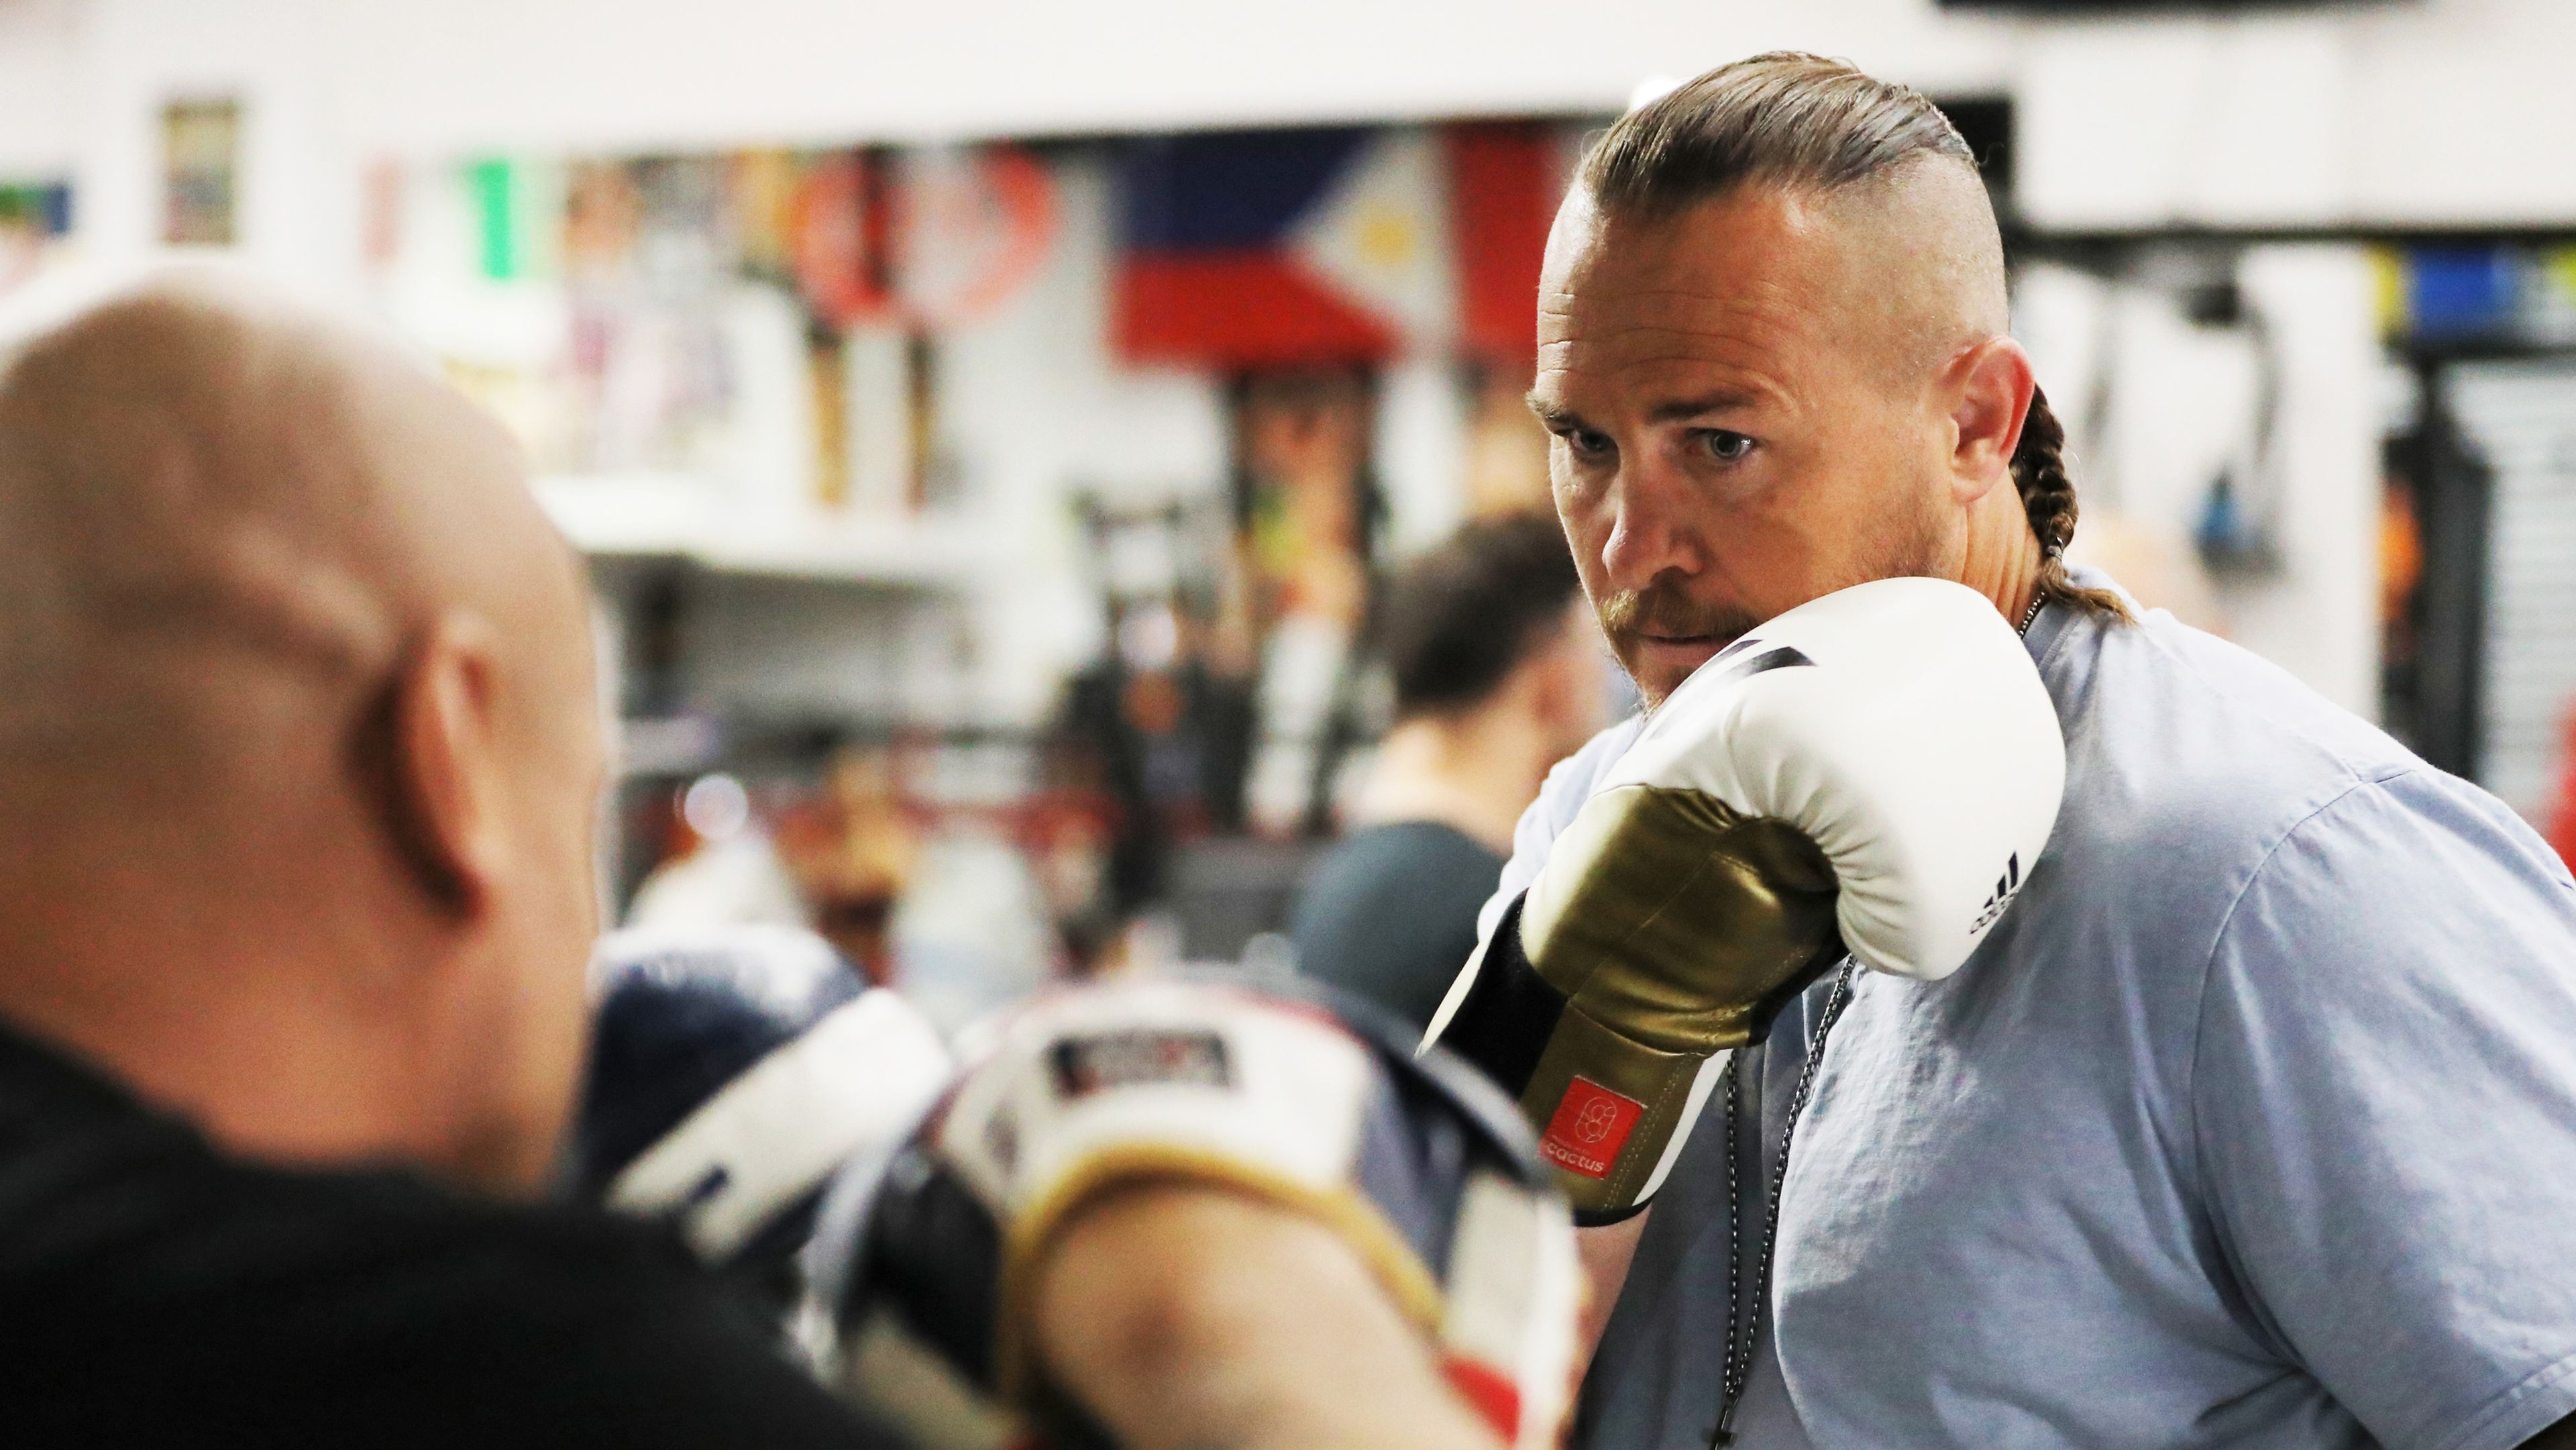 Matt Cooper dons the gloves for a sparring session at the Bondi Boxing Club.